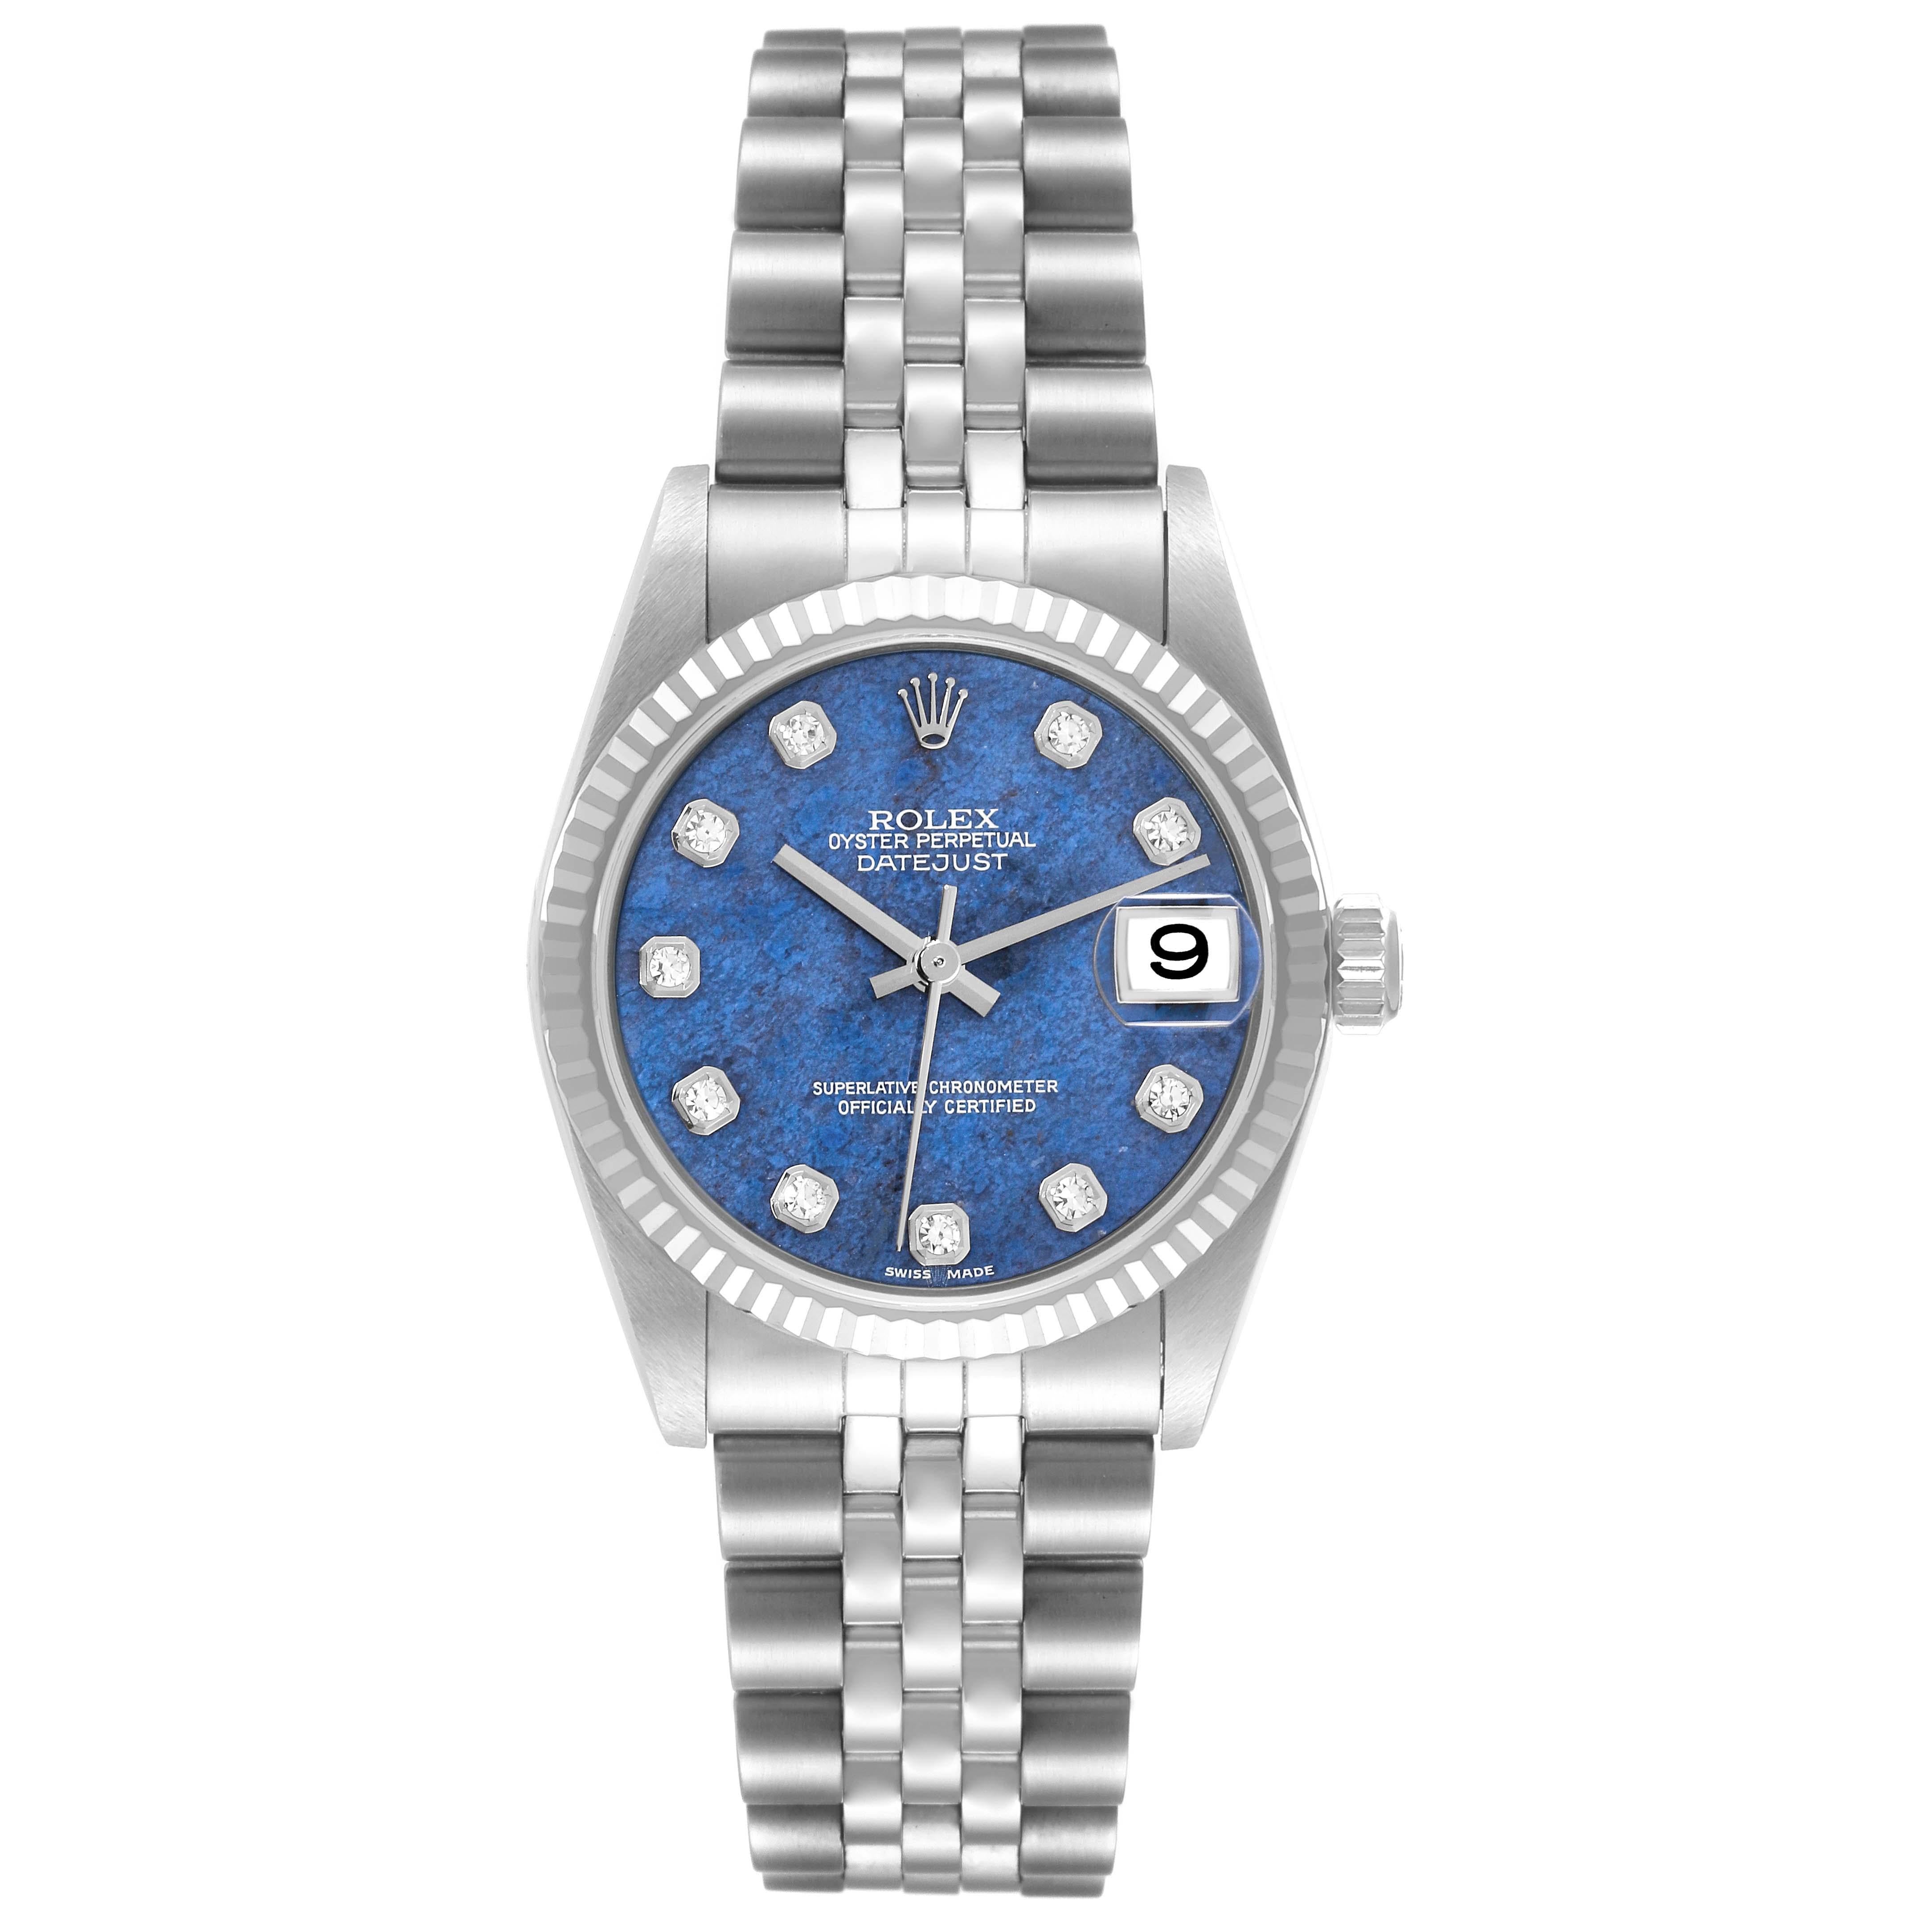 Rolex Datejust Midsize Steel White Gold Sodolite Dial Watch 78274 Box Papers. Officially certified chronometer self-winding movement. Stainless steel oyster case 31 mm in diameter. Rolex logo on a crown. 18k white gold fluted bezel. Scratch